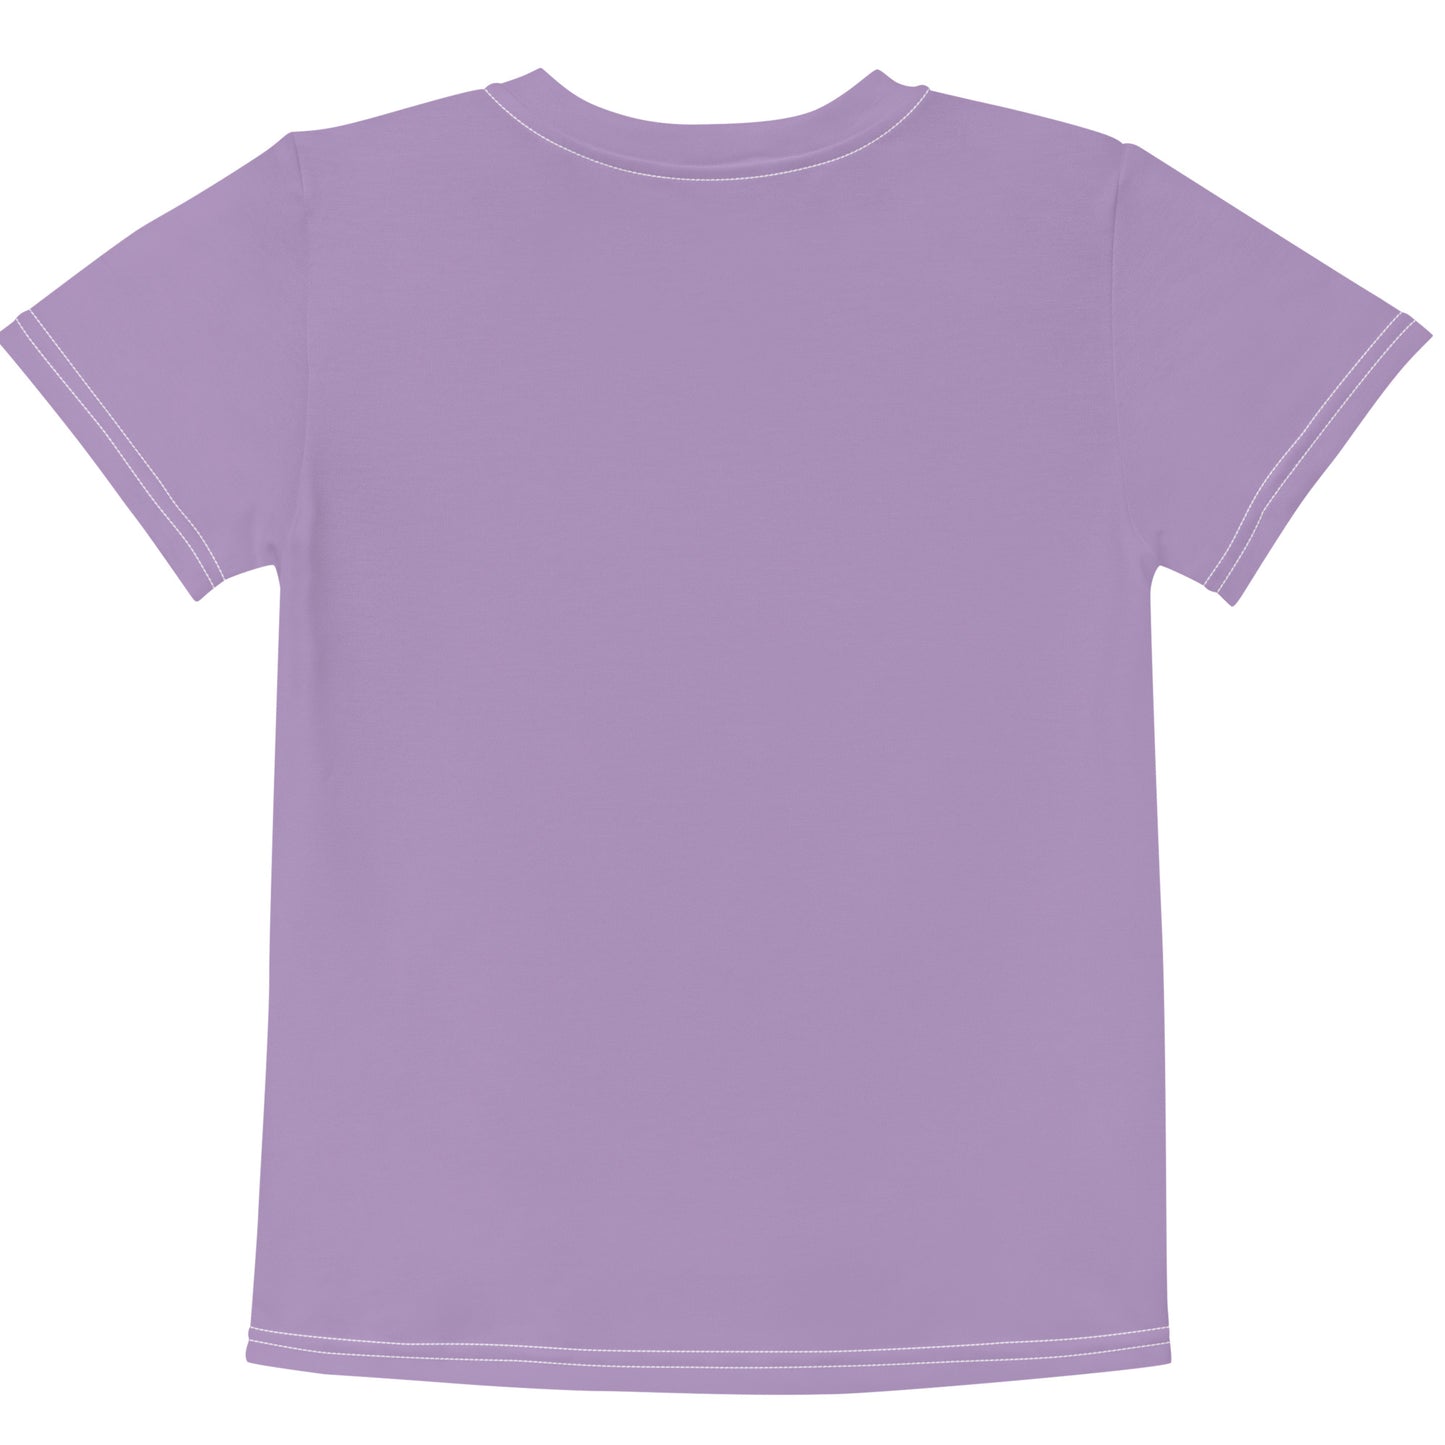 Lilac Climate Change Global Warming Statement - Sustainably Made Kids crew neck t-shirt